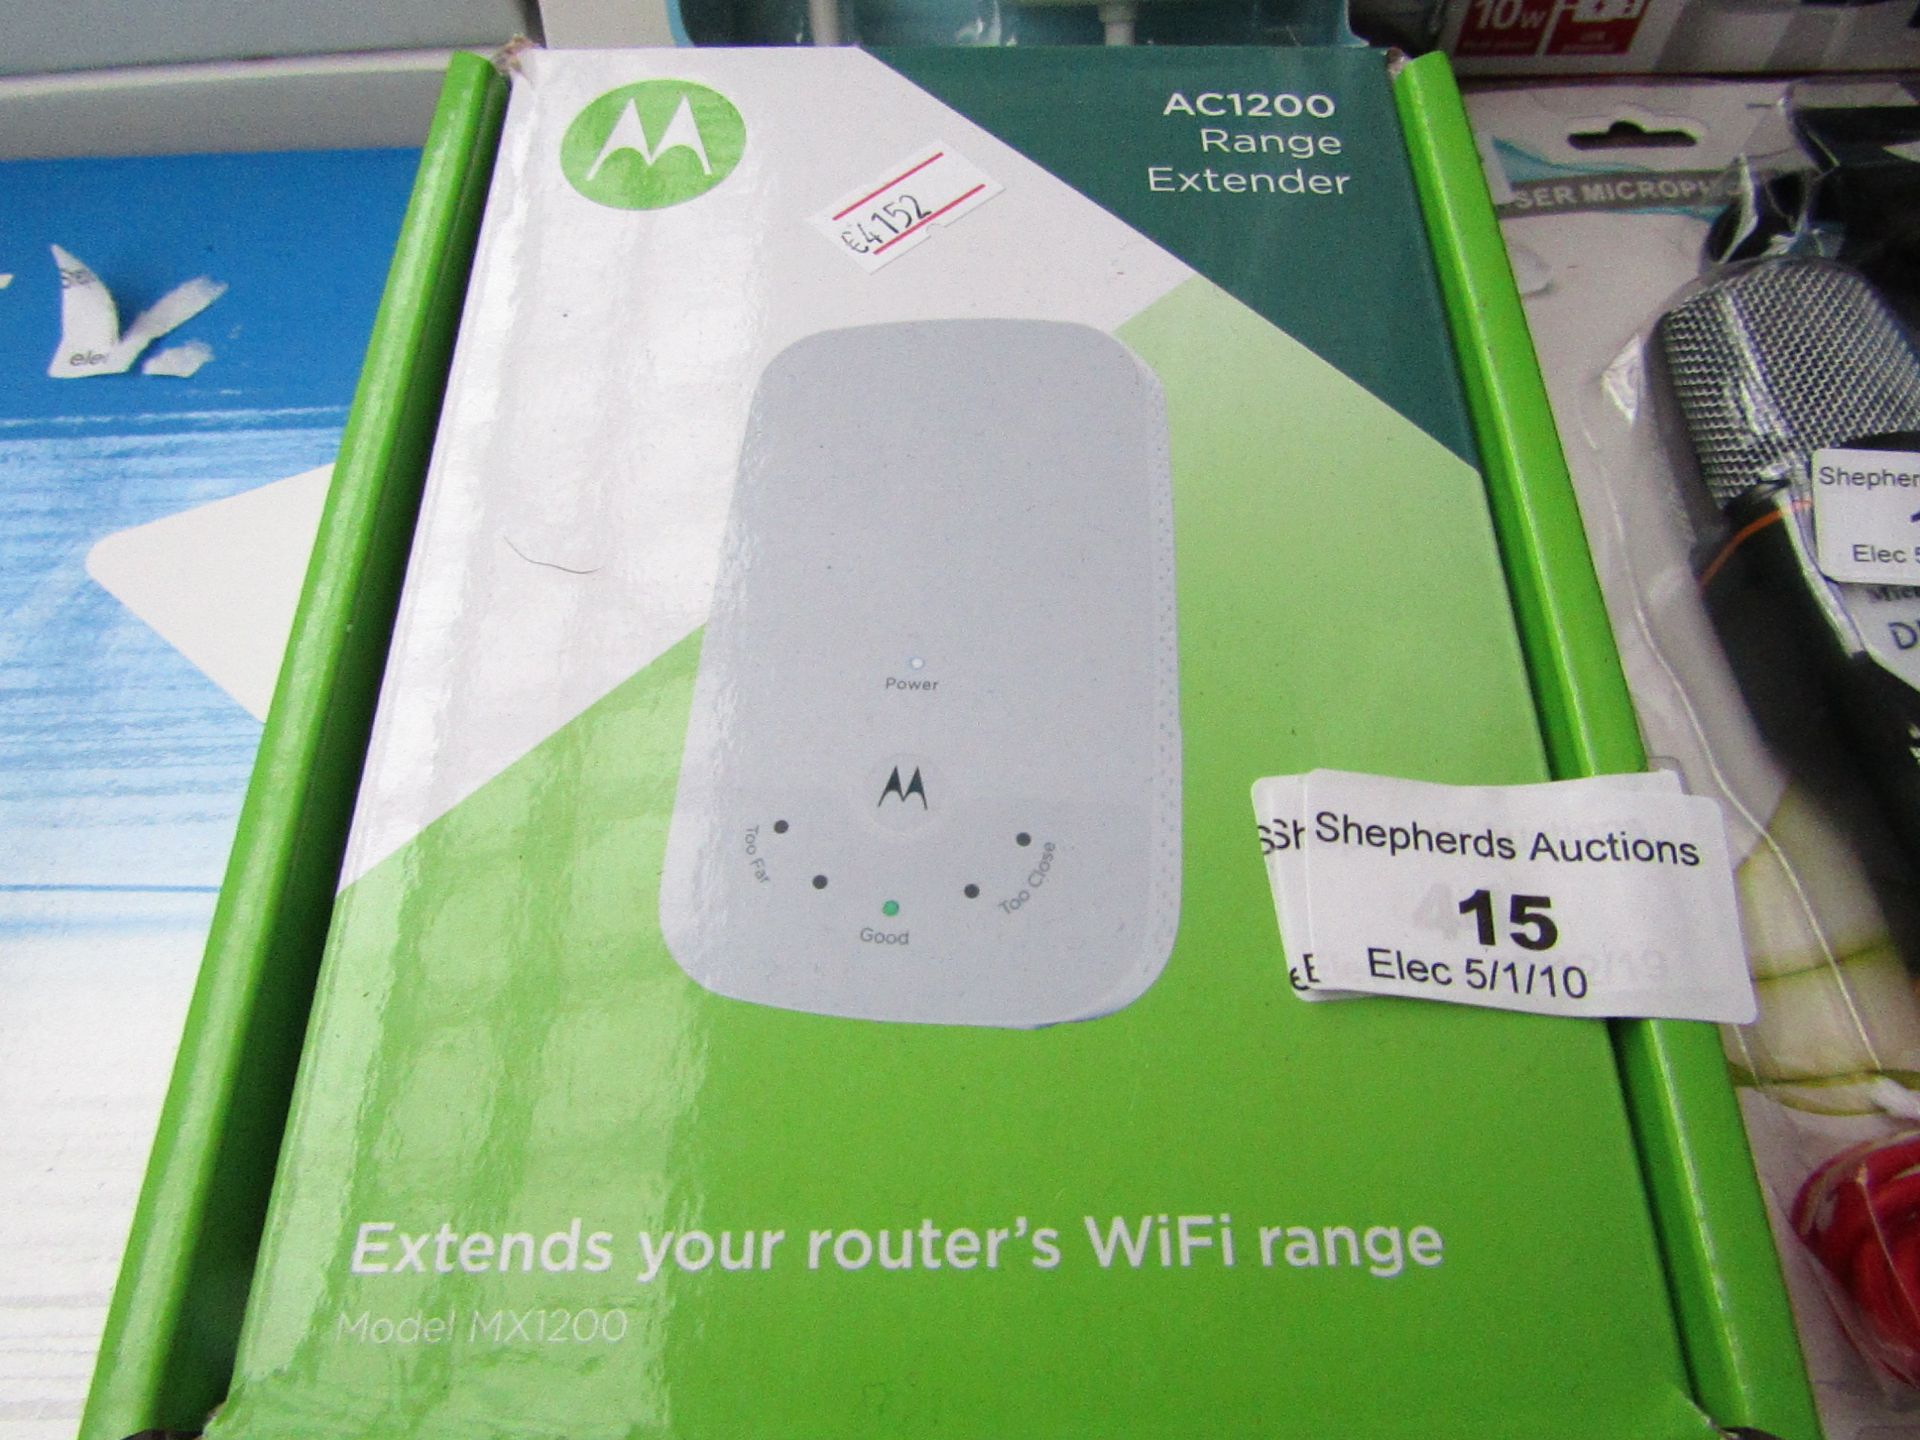 Motorola - AC1200 - WIFI Range Extender, untested and boxed.